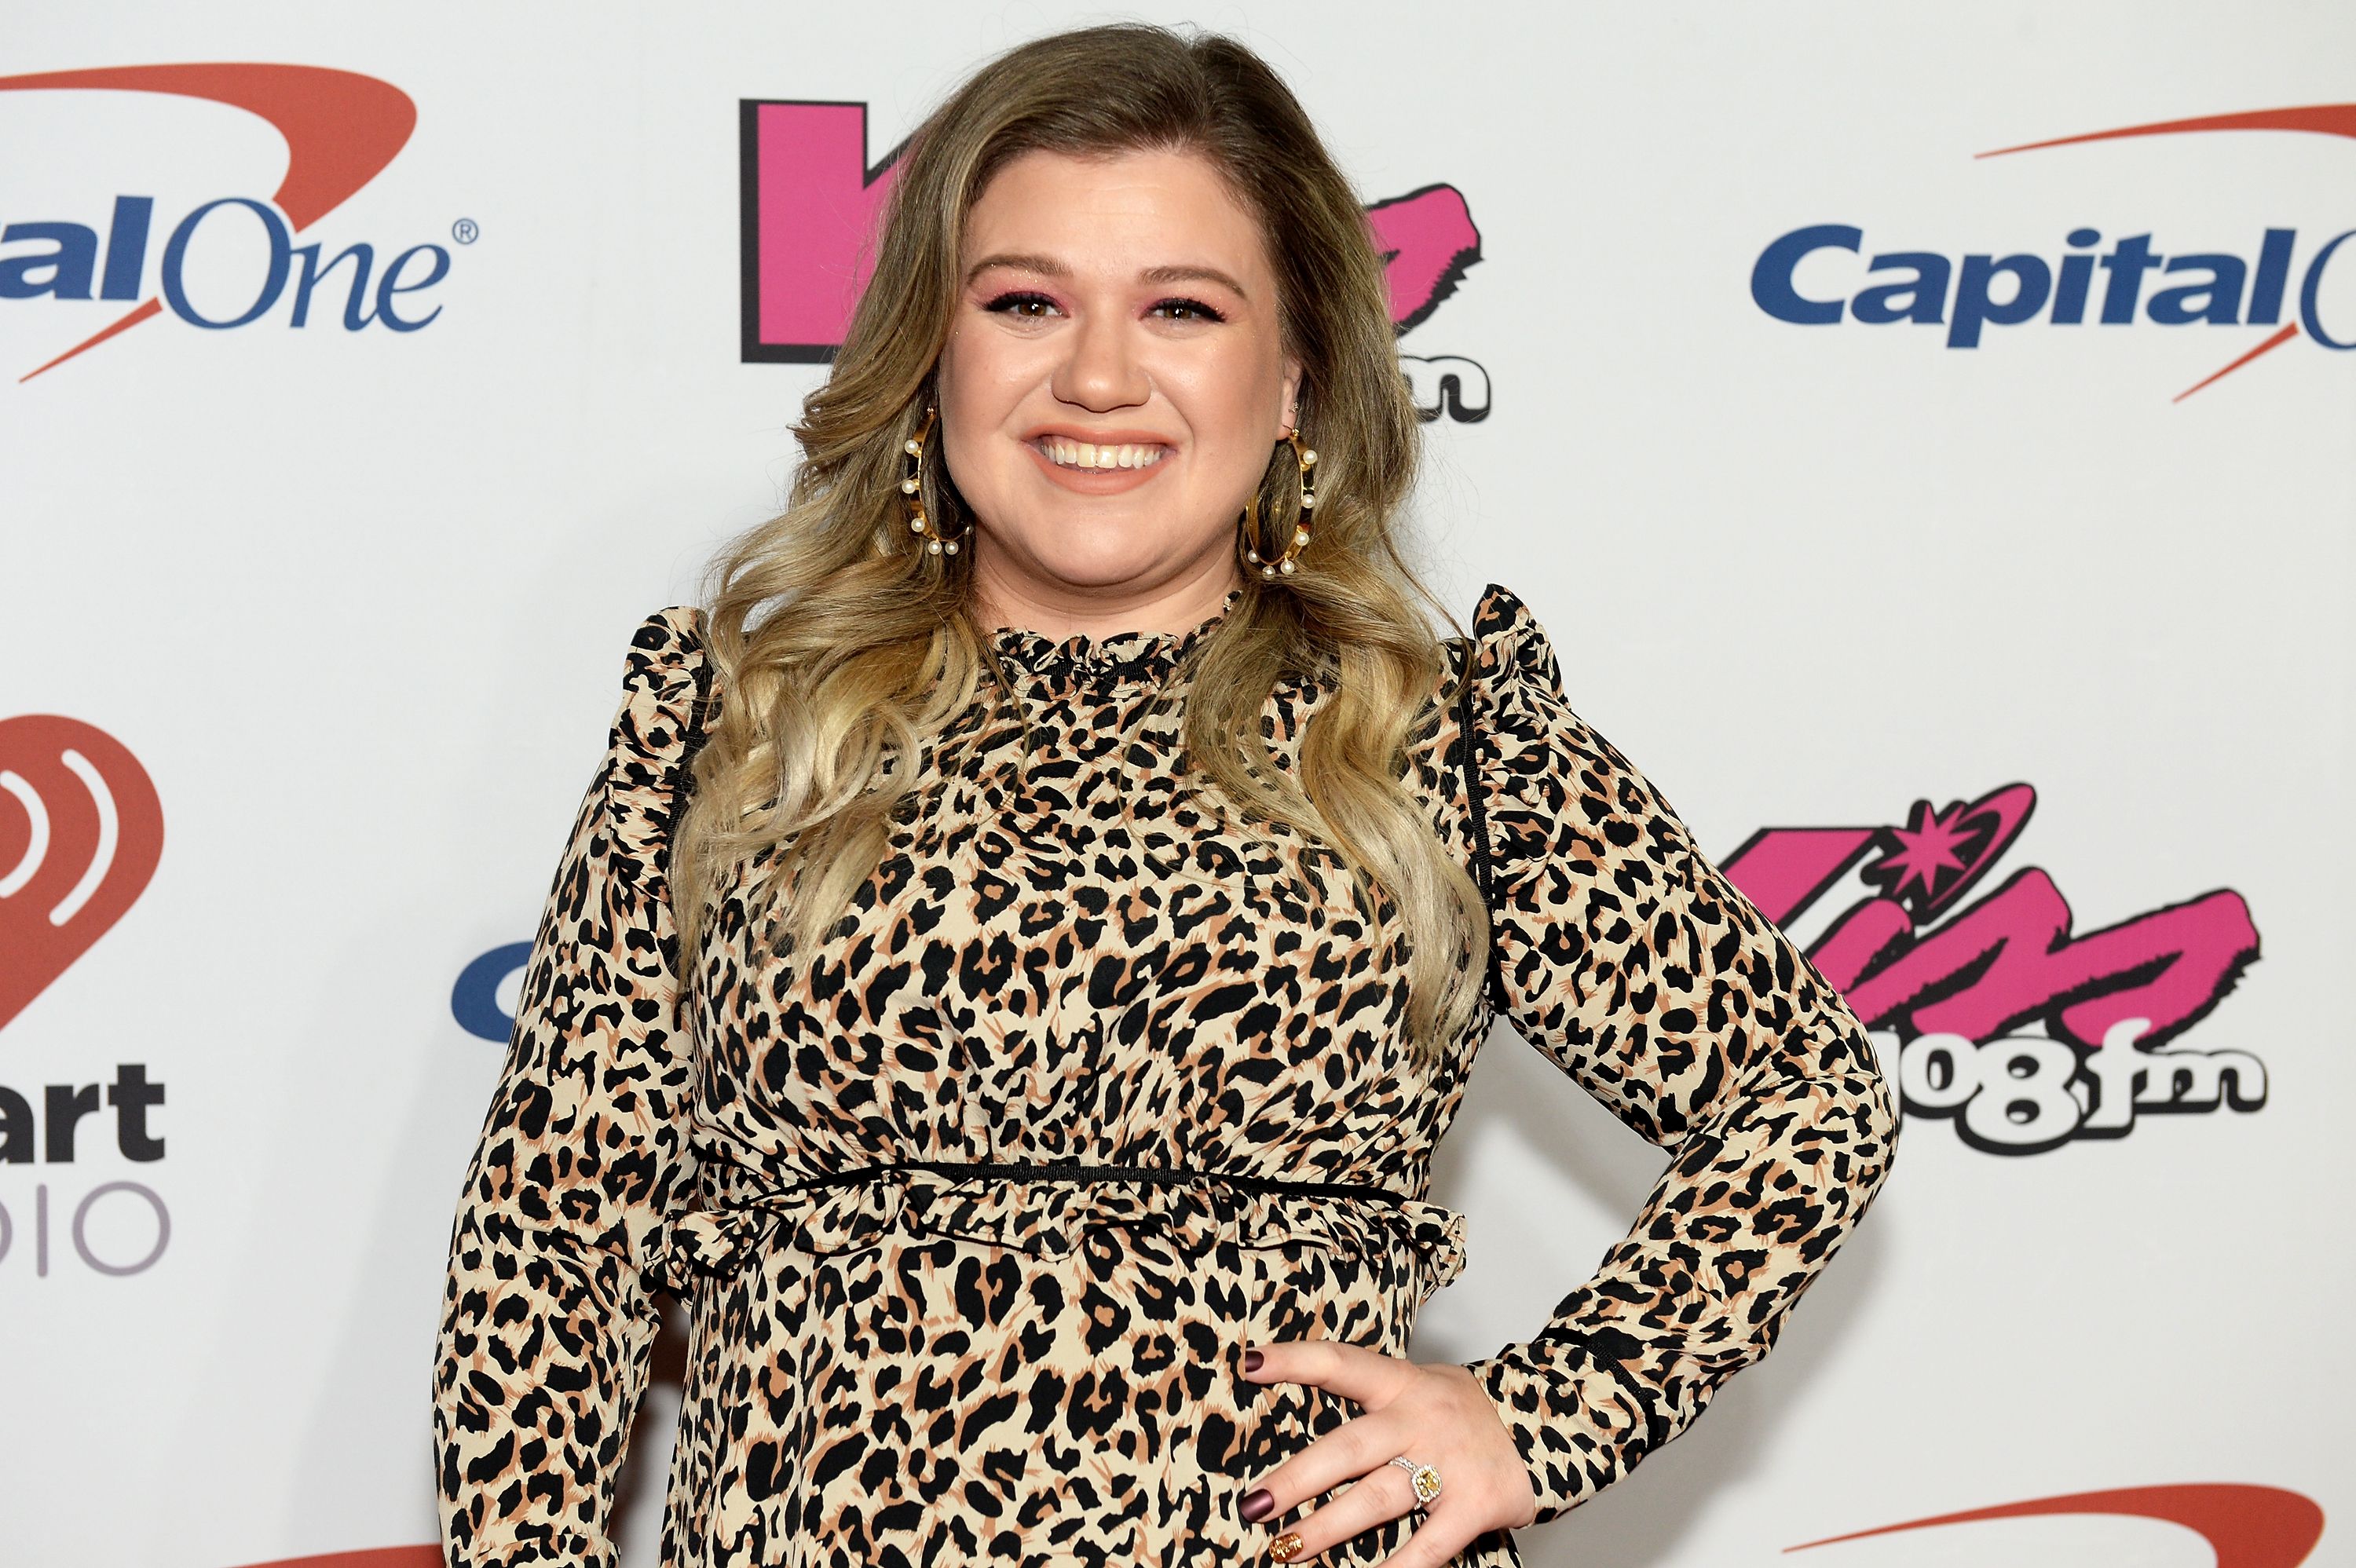 Kelly Clarkson during KISS 108's Jingle Ball 2017 presented by Capital One at TD Garden on December 10, 2017 in Boston, Mass. | Source: Getty Images